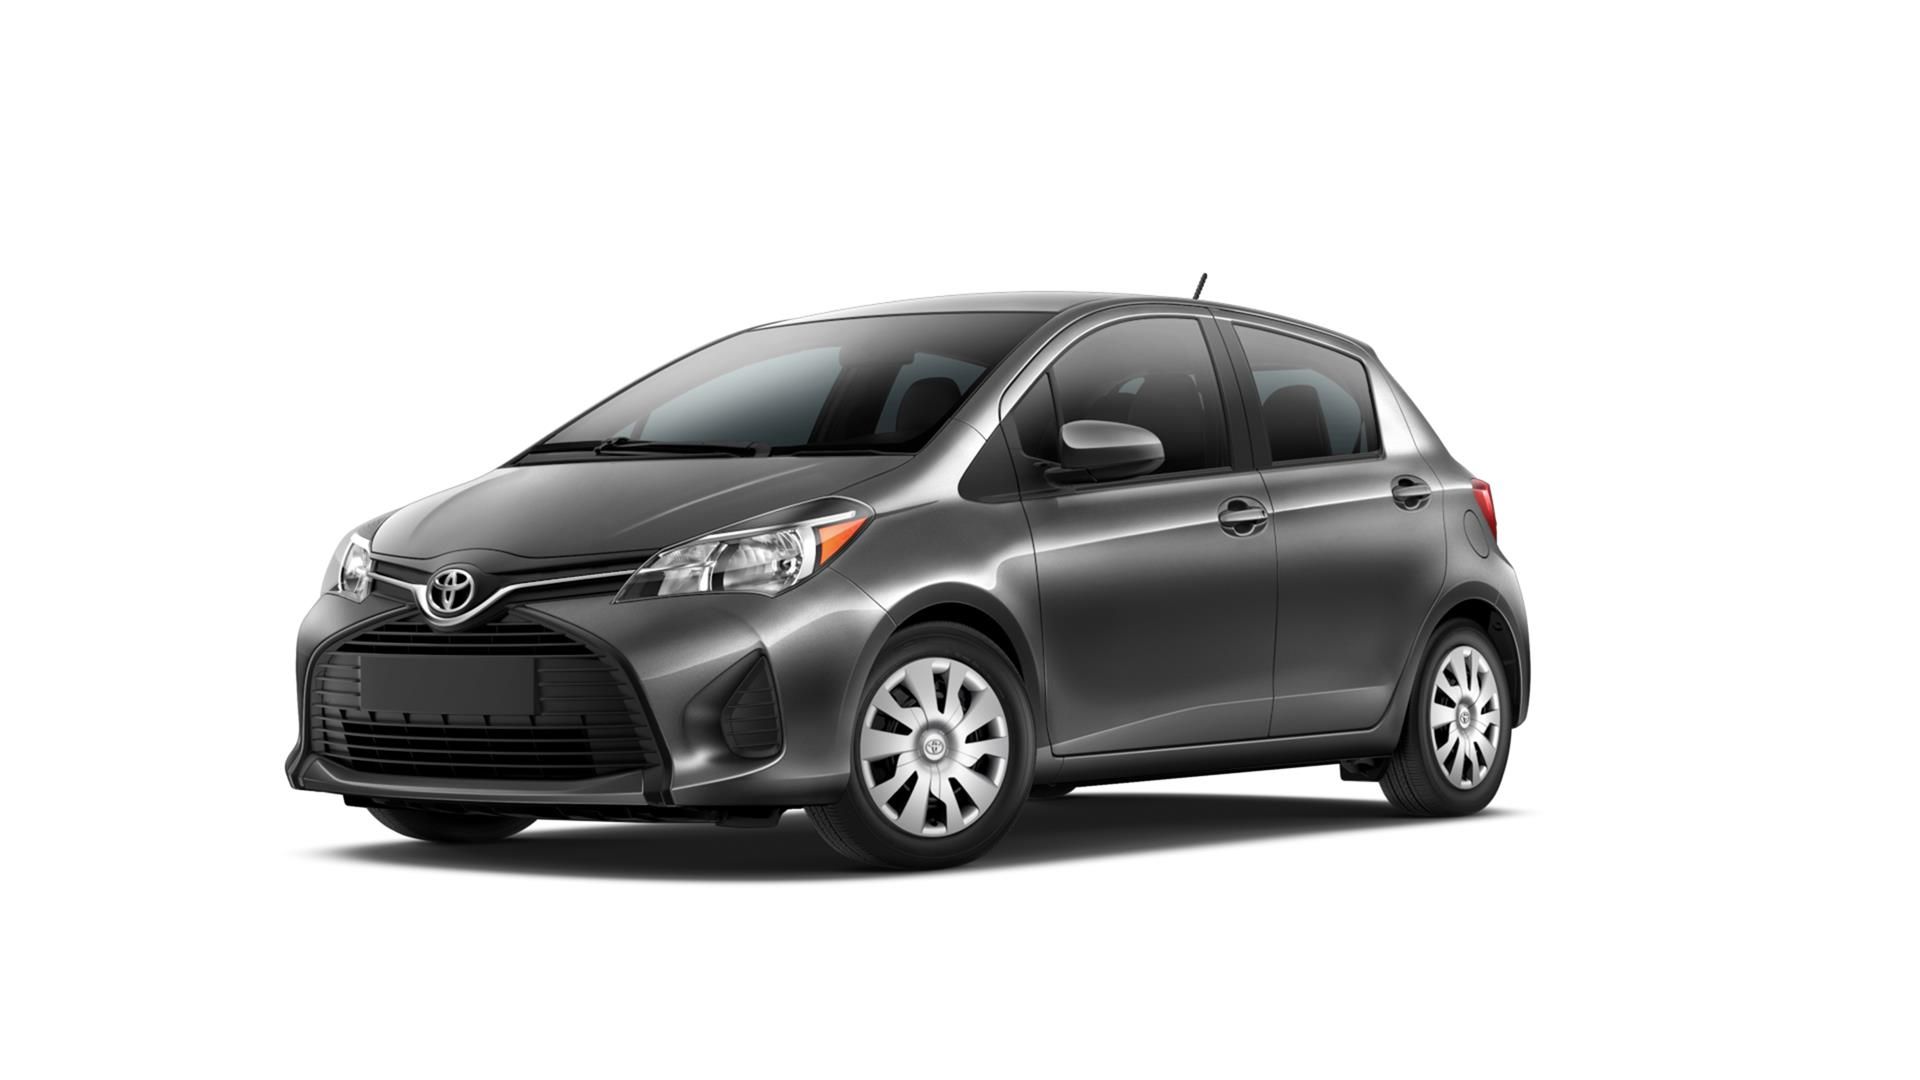 Toyota Yaris Wallpaper and Image Gallery - .com